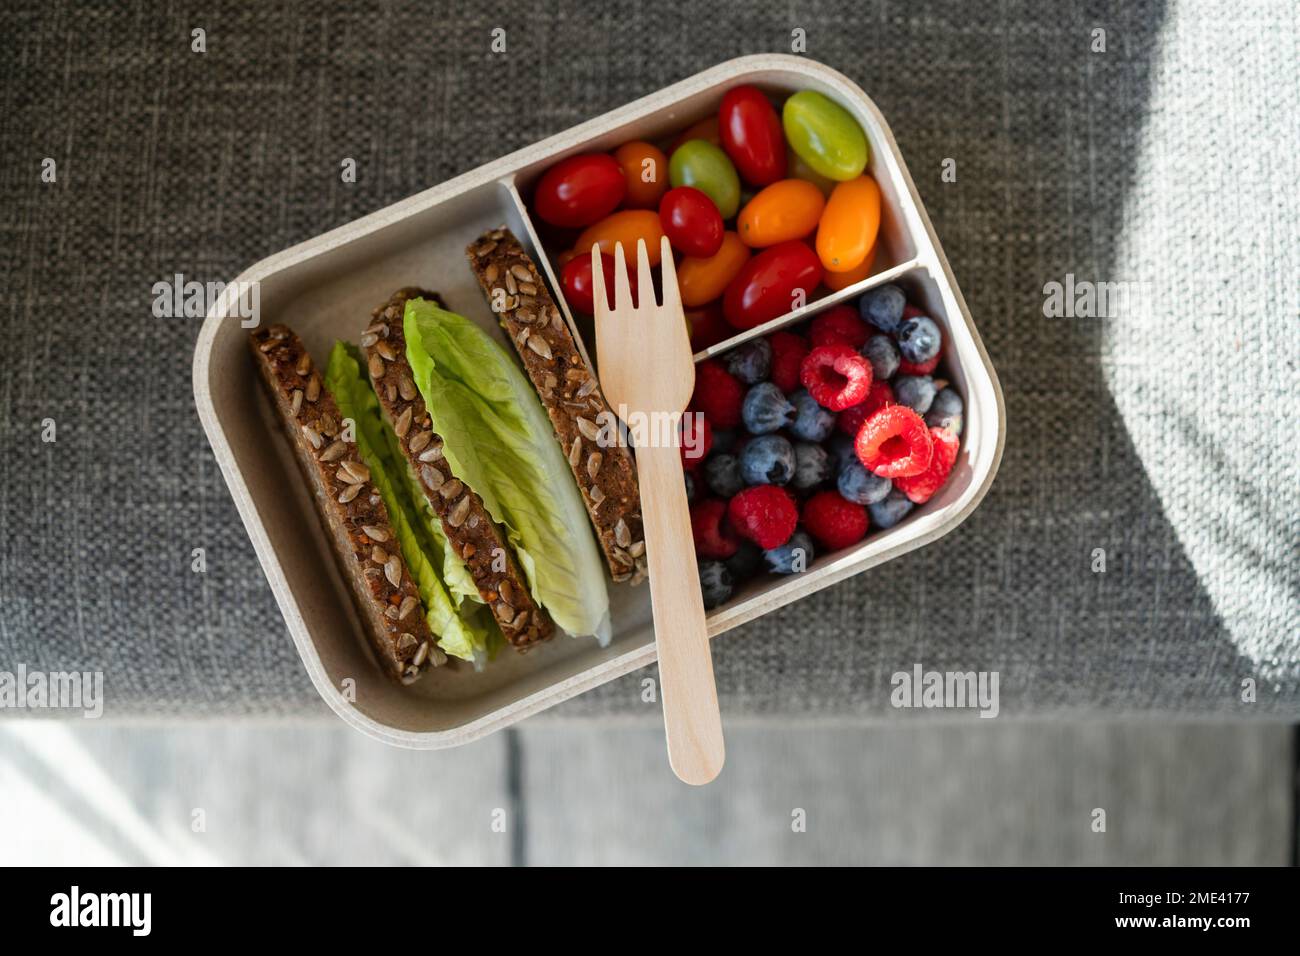 Rye bread, berries and salad with disposable fork in lunch box on sofa Stock Photo